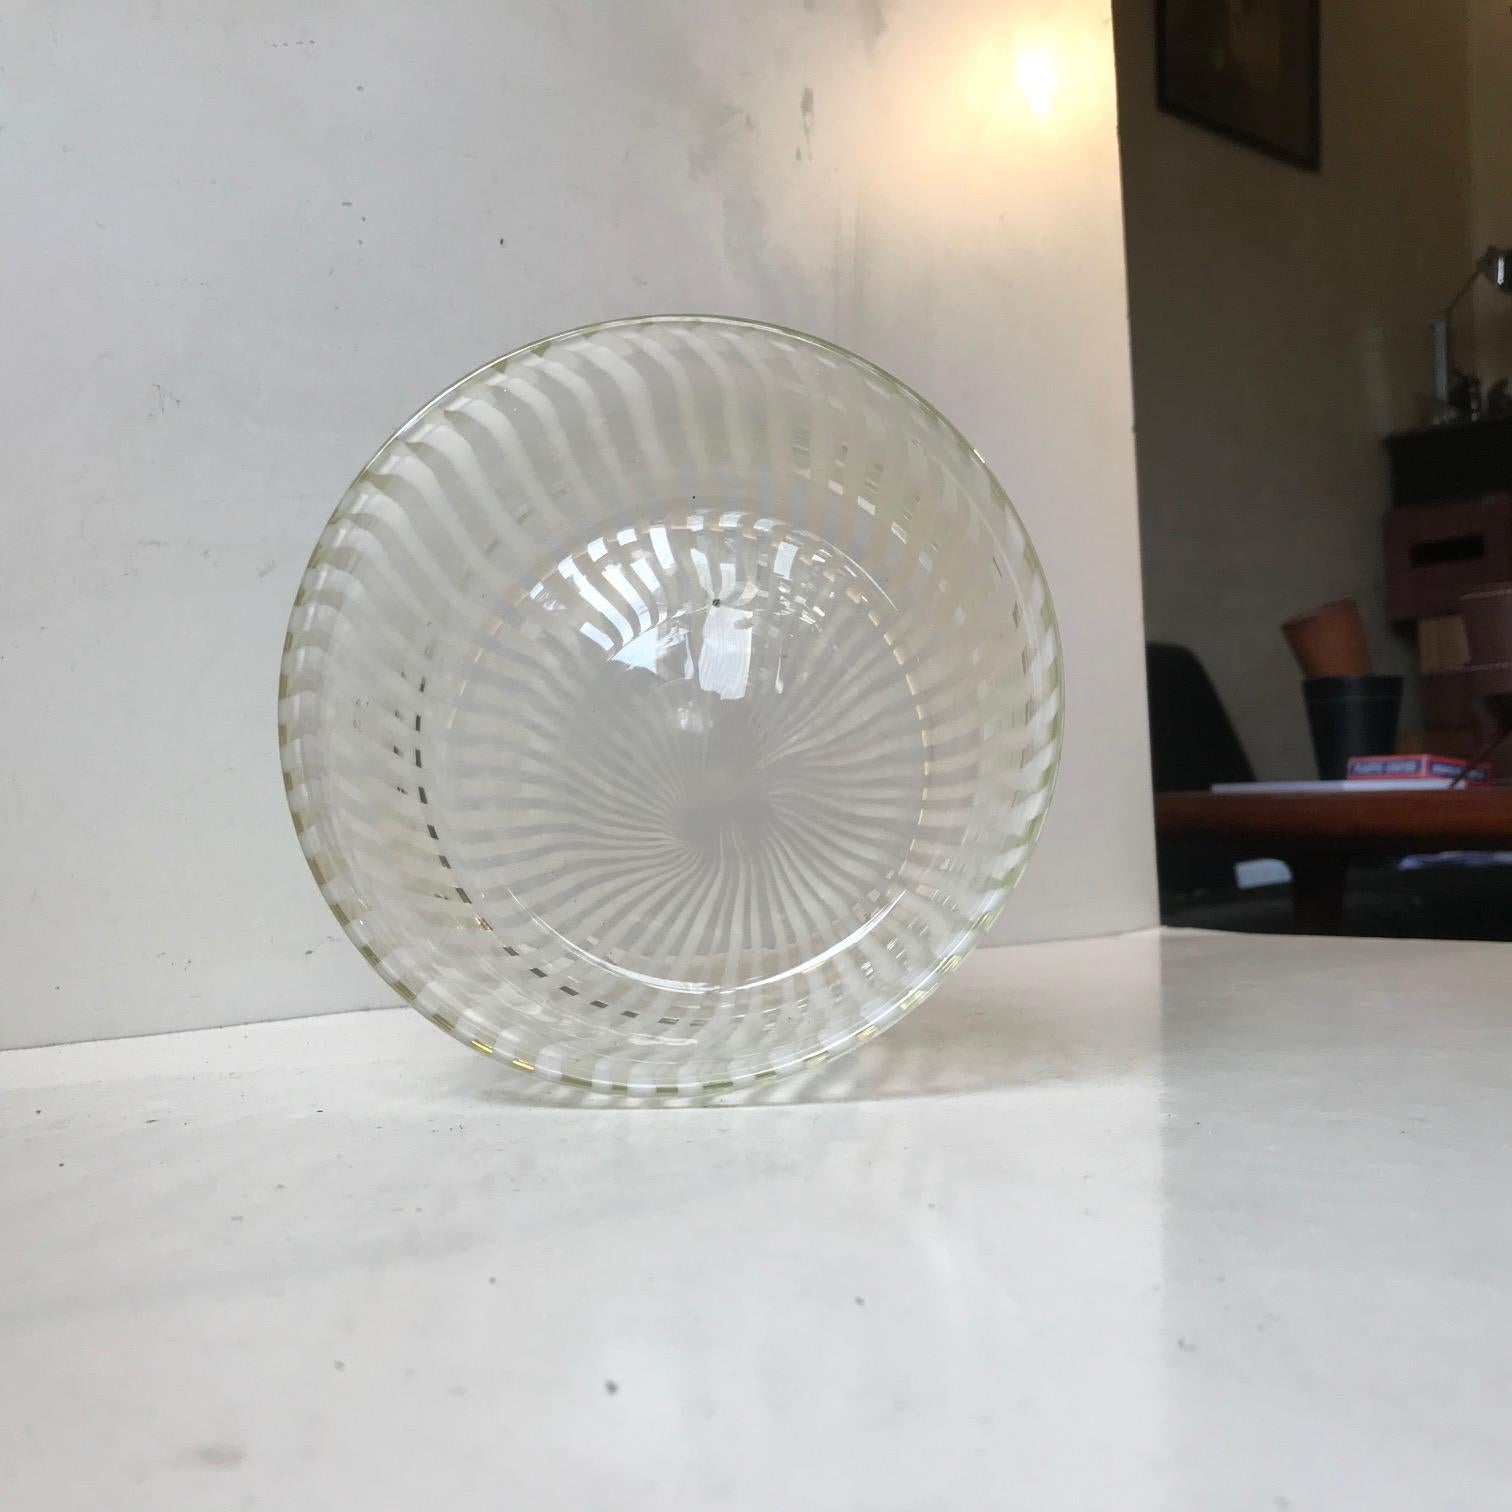 Circular clear glass bowl decorated with white incapsulated glass stripes. Technique: (Italian) Canne/Canne Retorte. It was made by Venini in Murano Italy during the 1960s and was probably designed by Fulvio Bianconi. Measurements: D: 16.5, H: 10.5